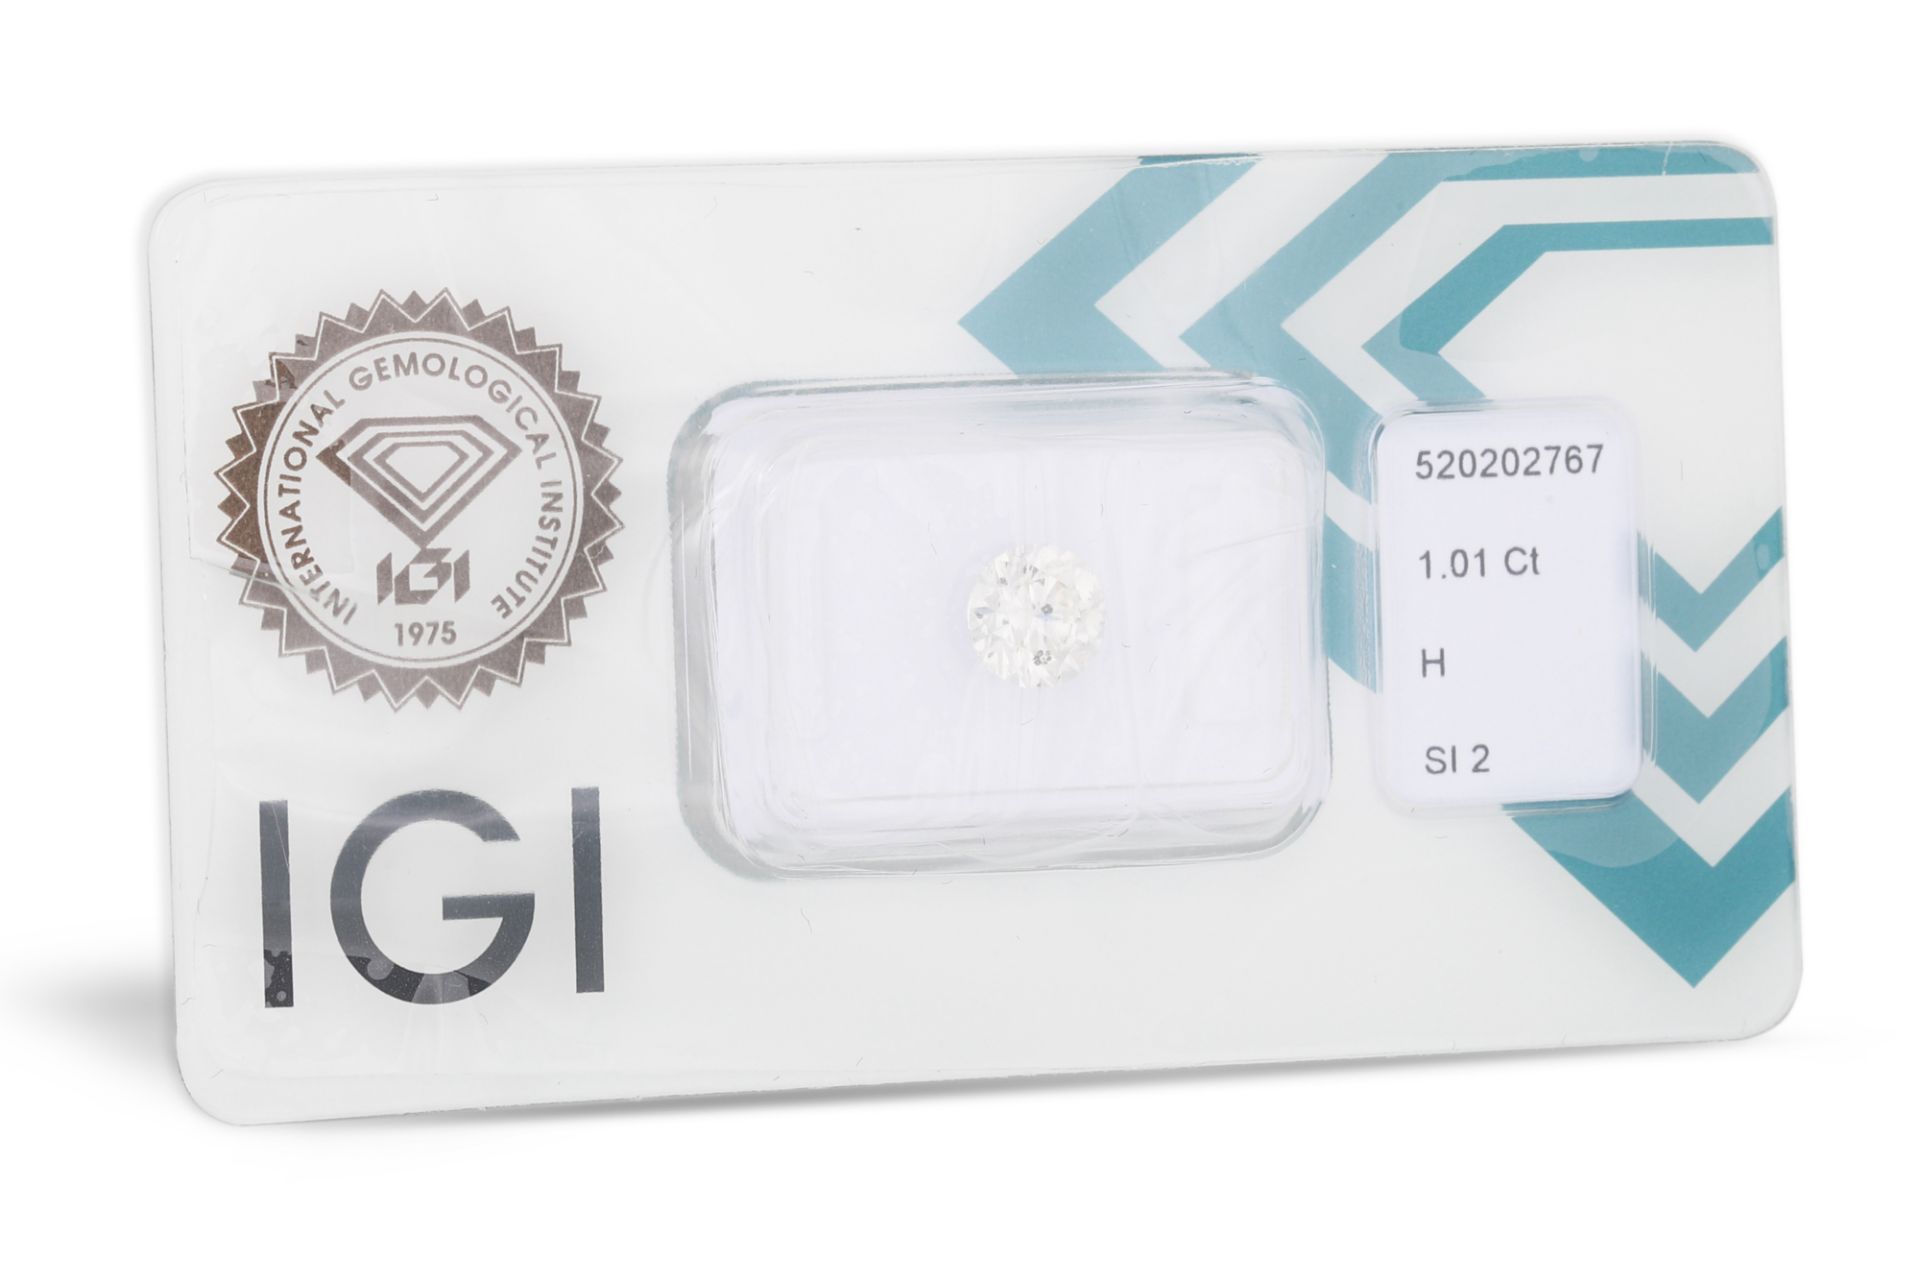 AN UNMOUNTED DIAMOND, in a sealed IGI packet. Together with an IGI Cert stating: 1.01 ct, colour and